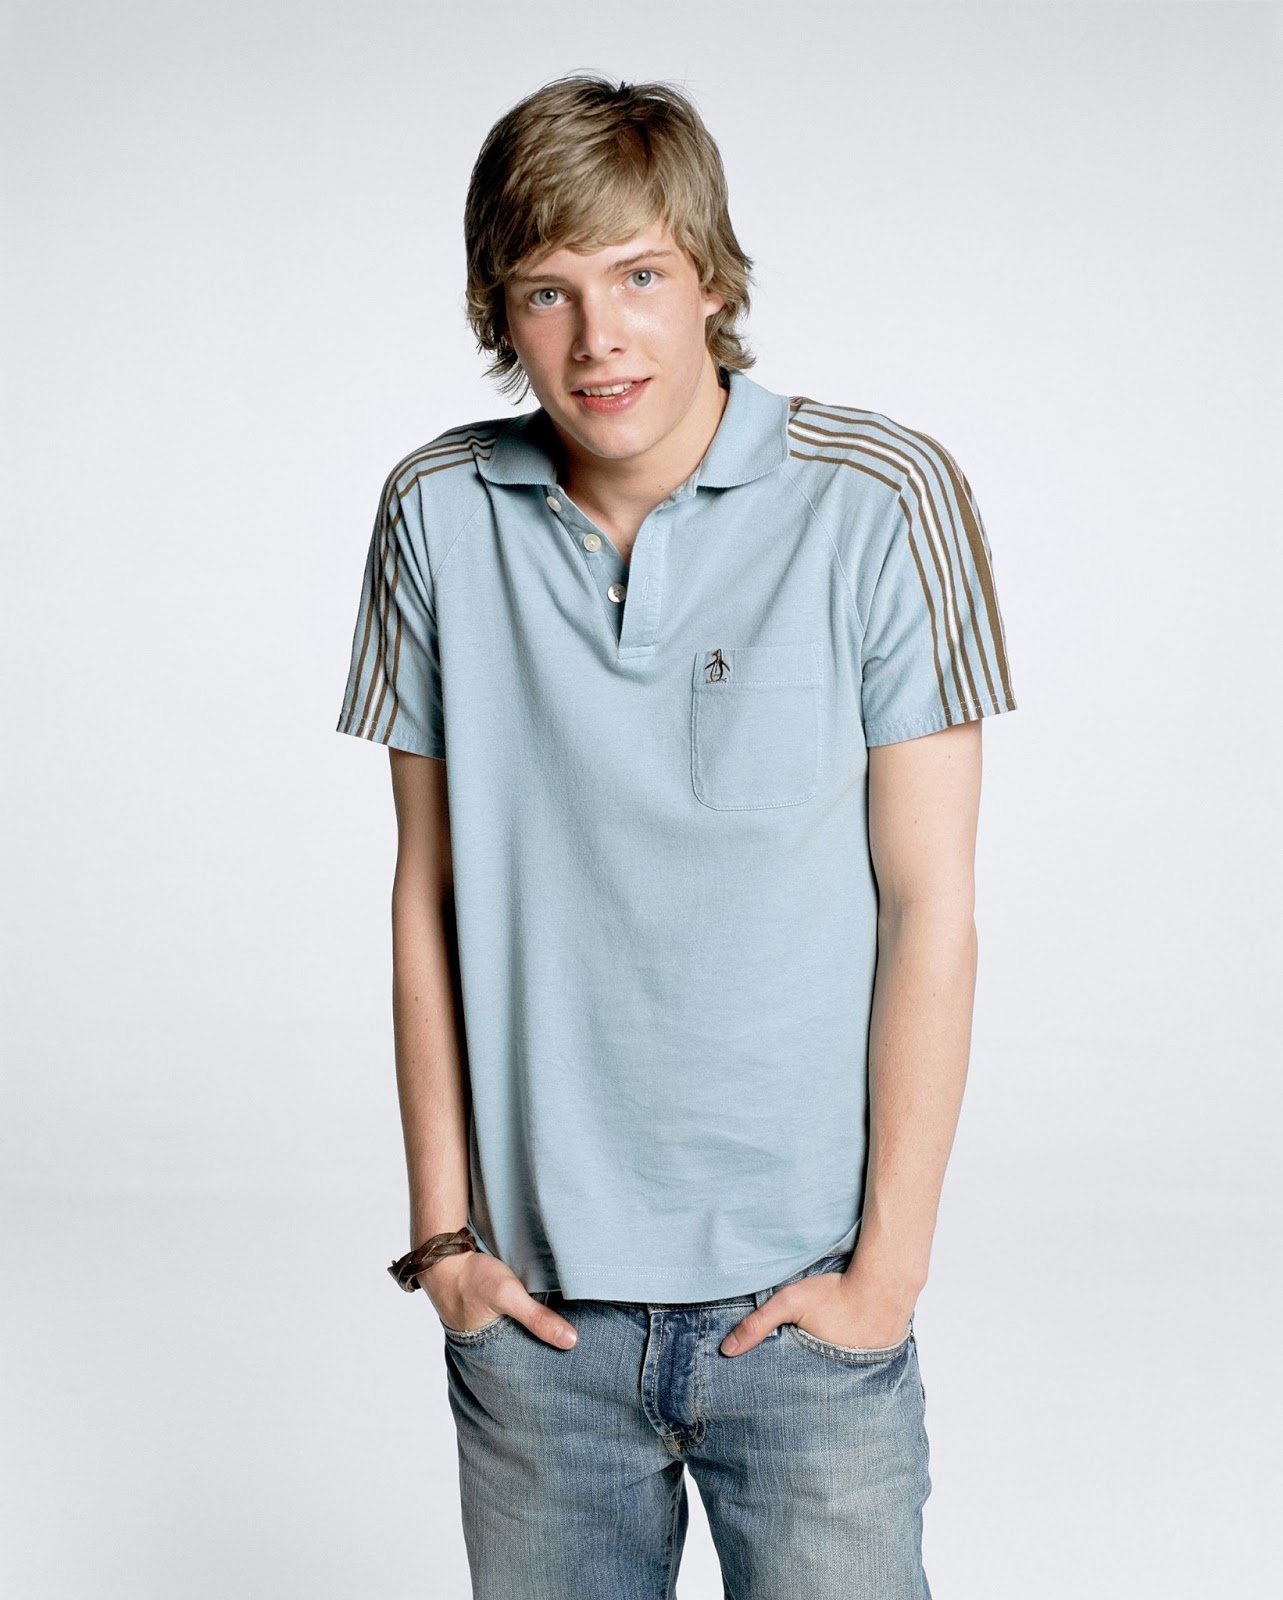 Hunter Parrish Photos | Tv Series Posters and Cast1283 x 1600